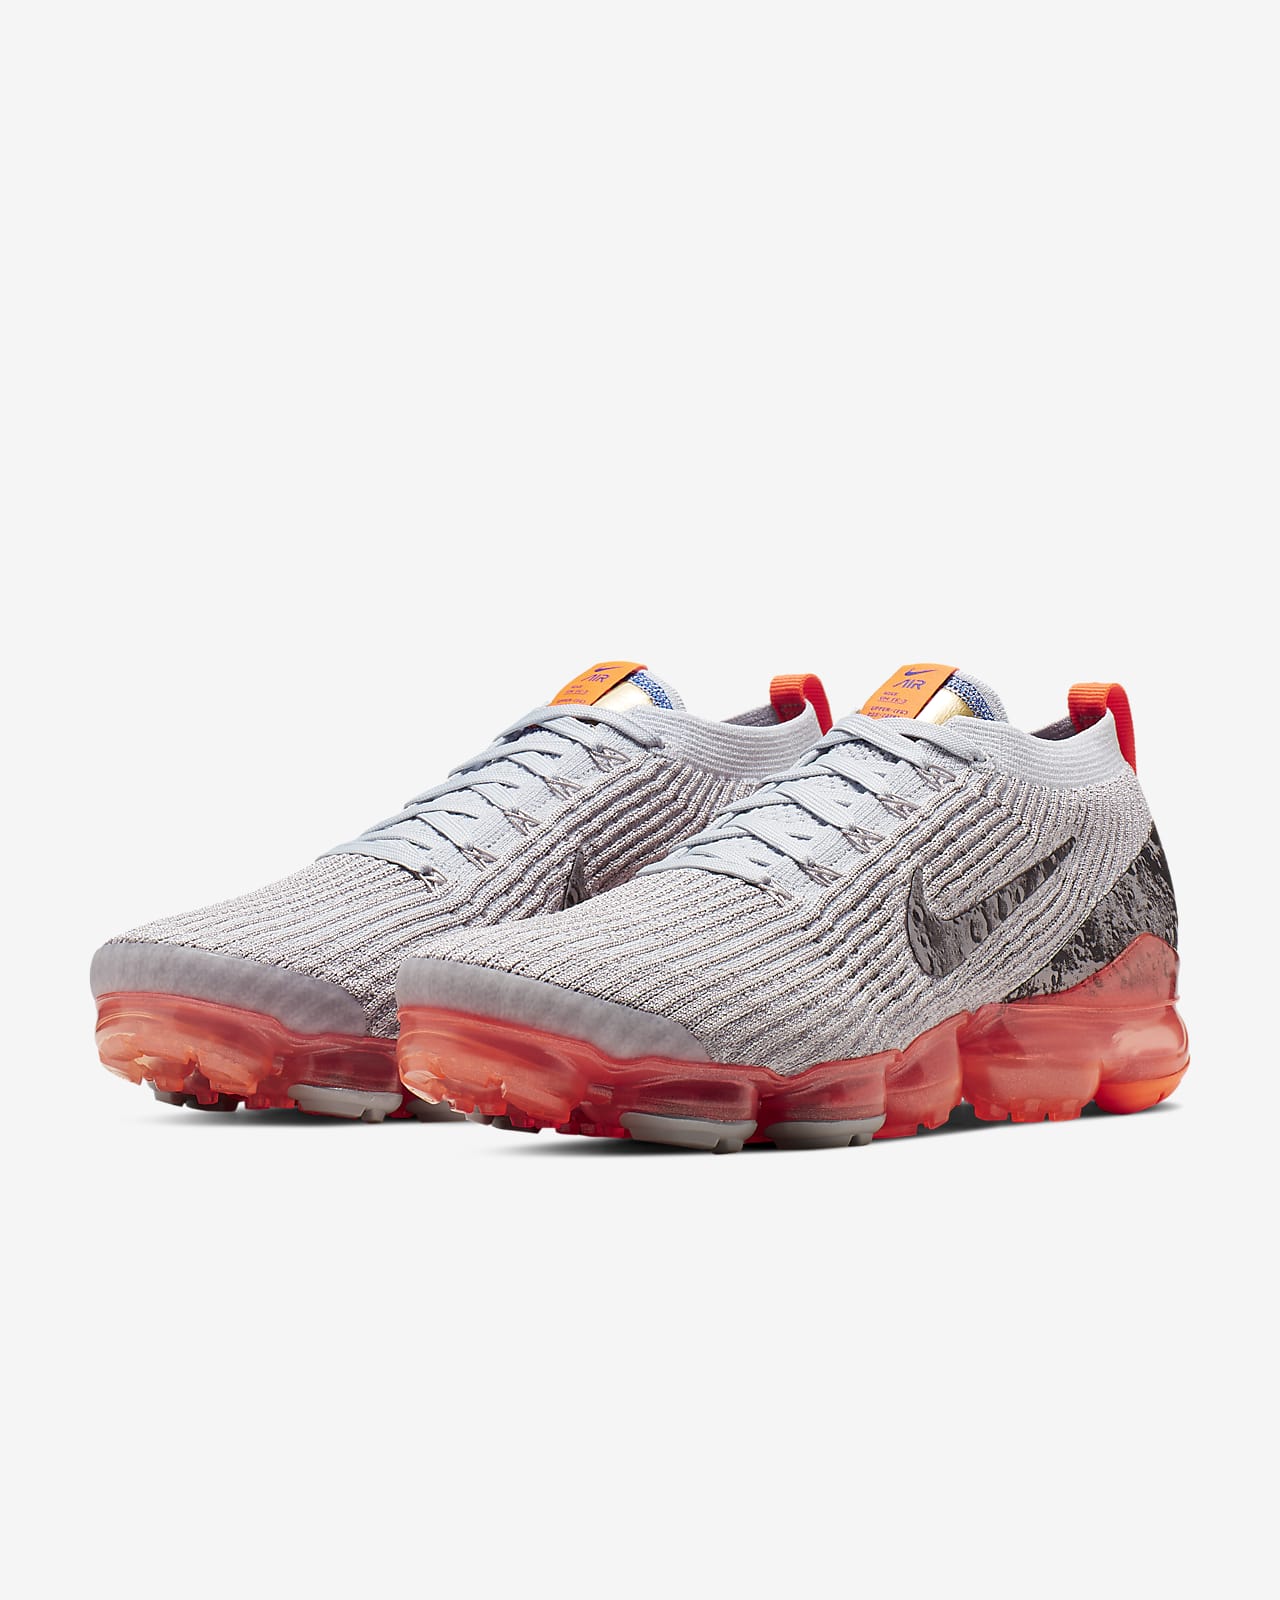 nike vapormax flyknit limited edition